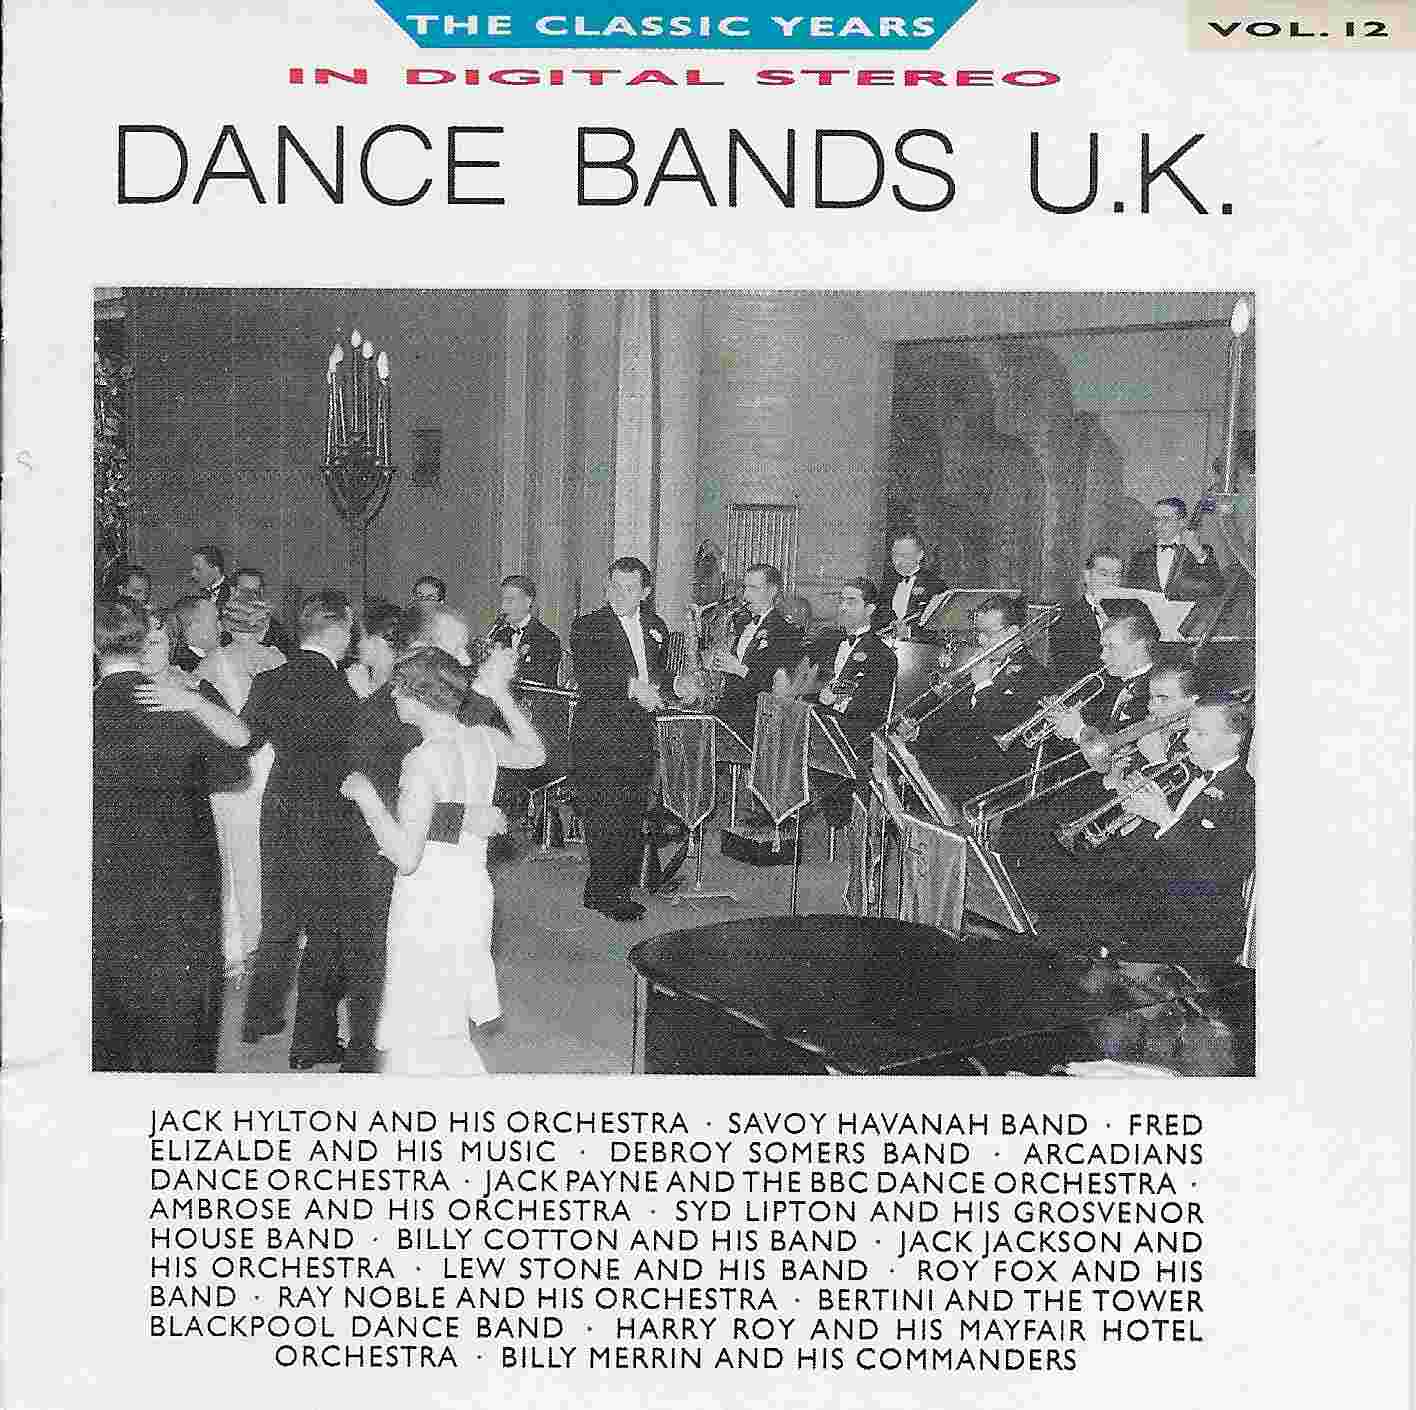 Picture of BBCCD681 Classic years - Volume 12, Dance bands UK by artist Various from the BBC cds - Records and Tapes library